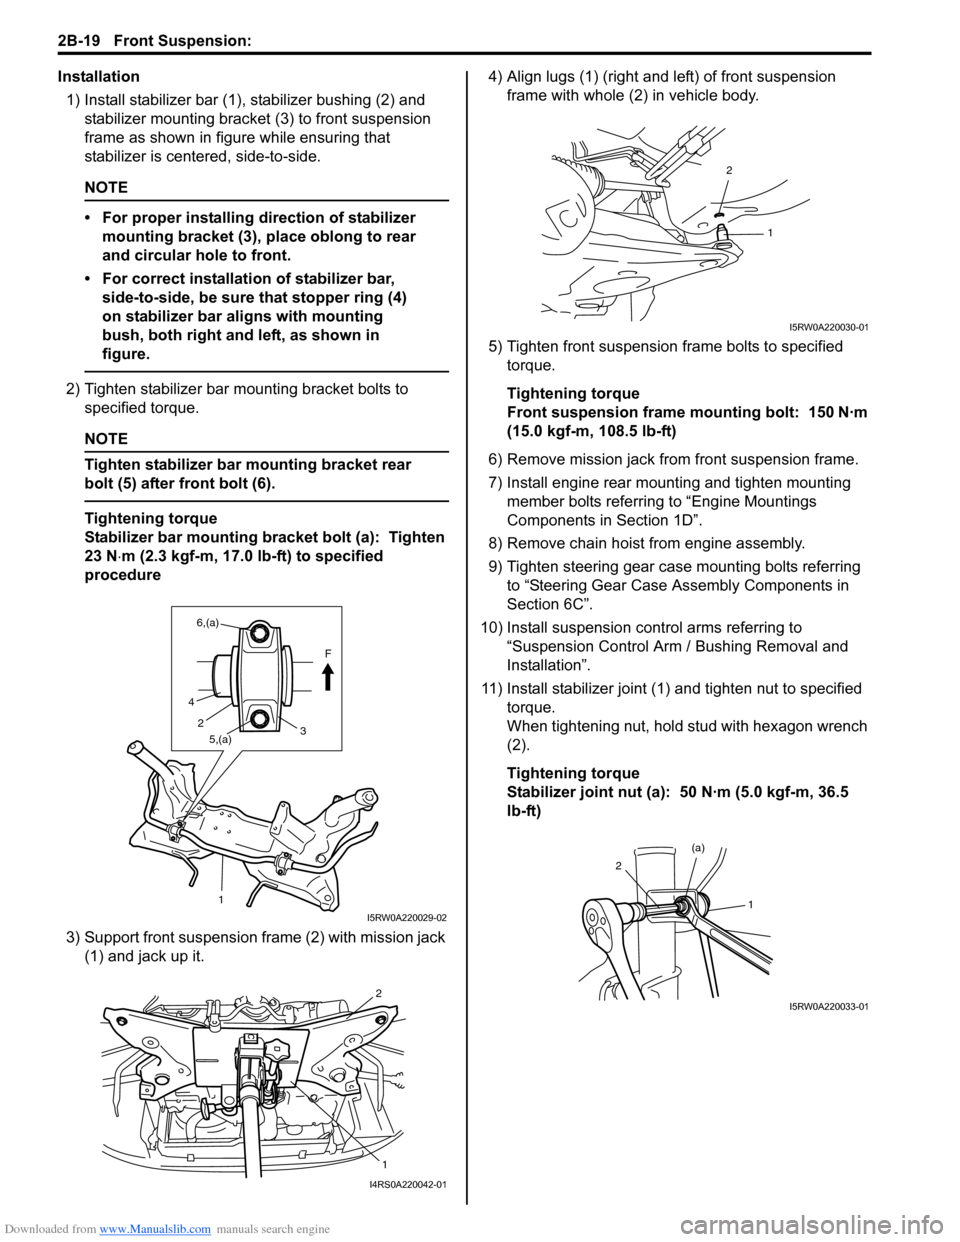 SUZUKI SX4 2006 1.G Service User Guide Downloaded from www.Manualslib.com manuals search engine 2B-19 Front Suspension: 
Installation
1) Install stabilizer bar (1), stabilizer bushing (2) and 
stabilizer mounting bracket (3) to front suspe